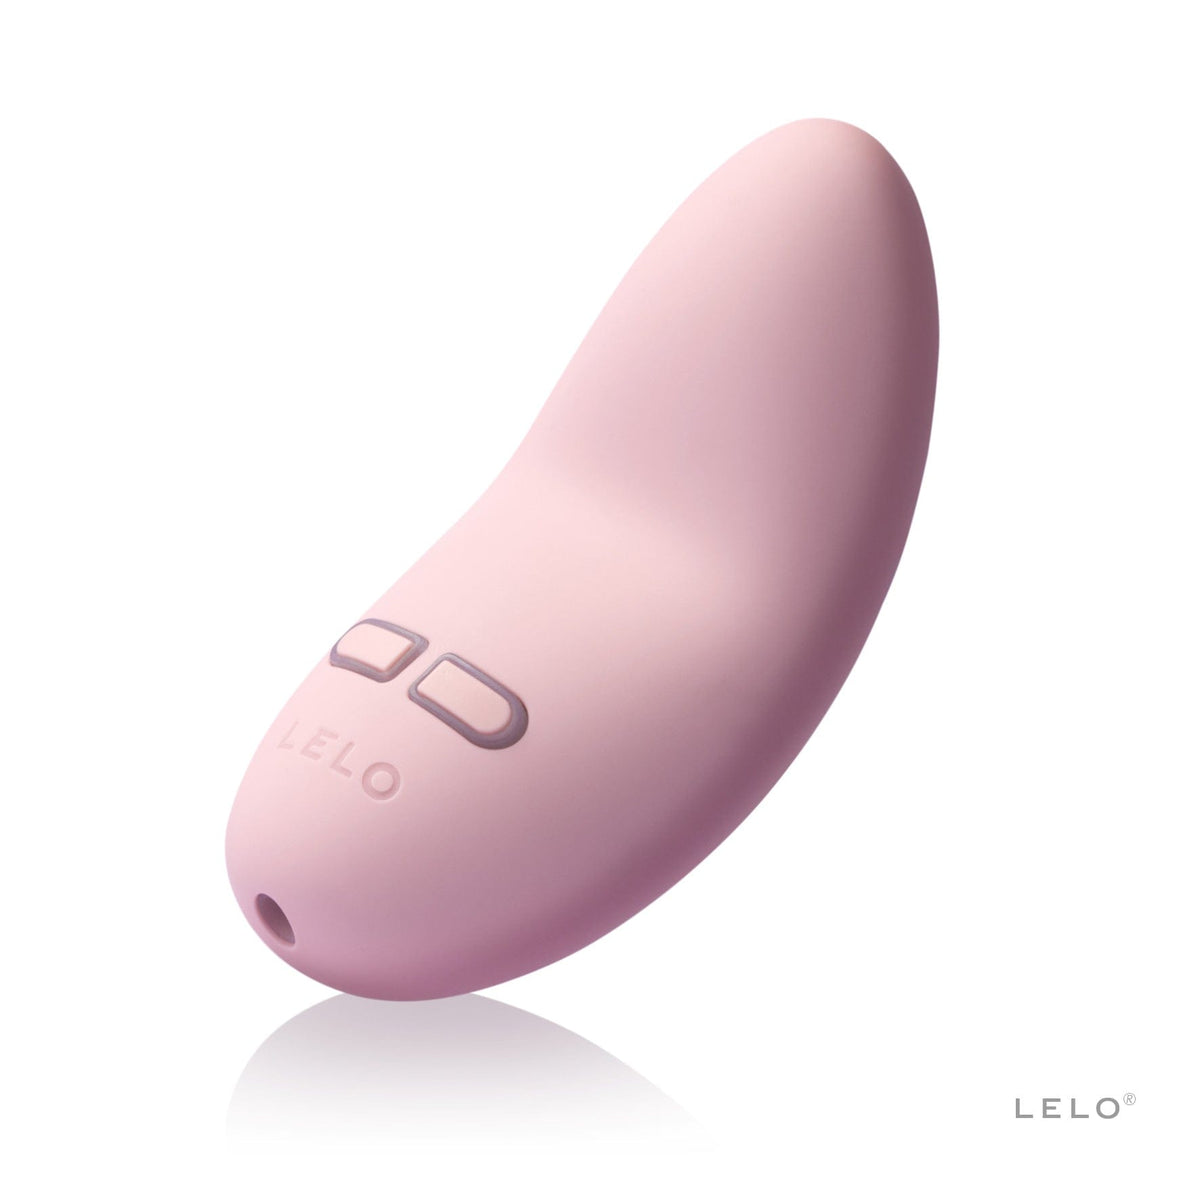 LELO Lily 2  Handheld Small Vibrator with Delicate Scent - Pink (Rose & Wisteria) Vibrators Lelo   